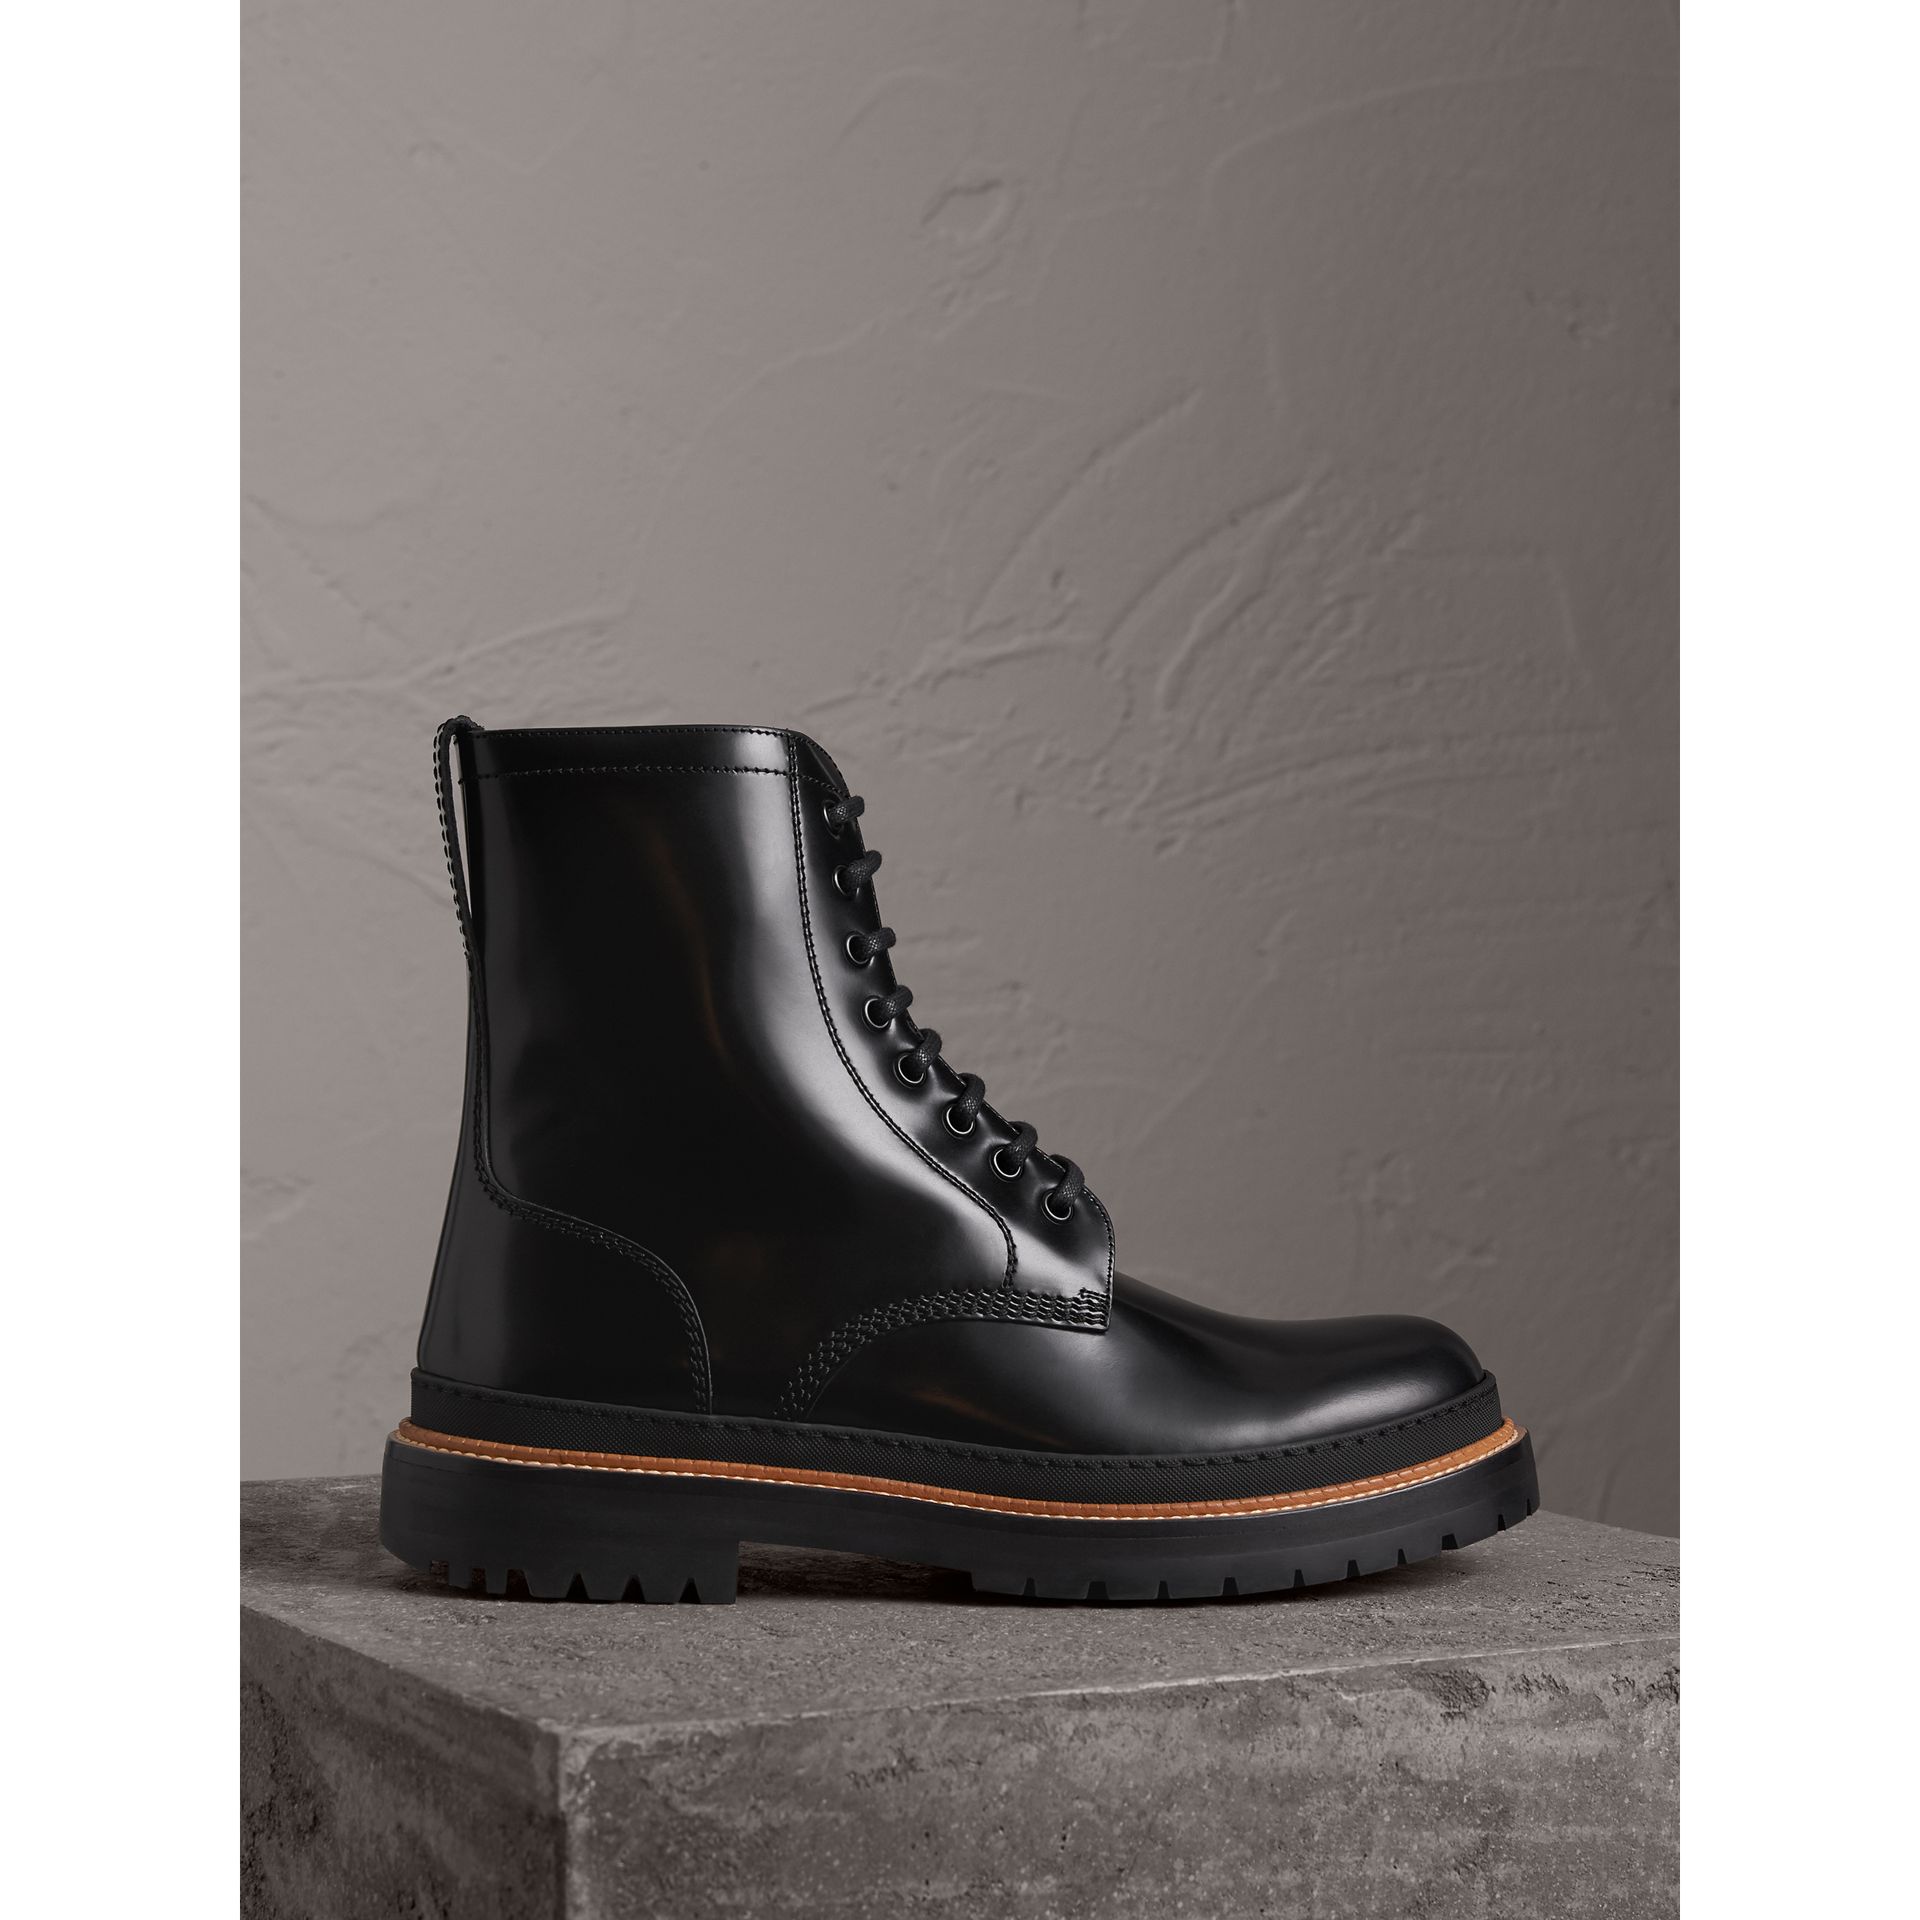 BURBERRY Lace-Up Polished Leather Boots, Black | ModeSens